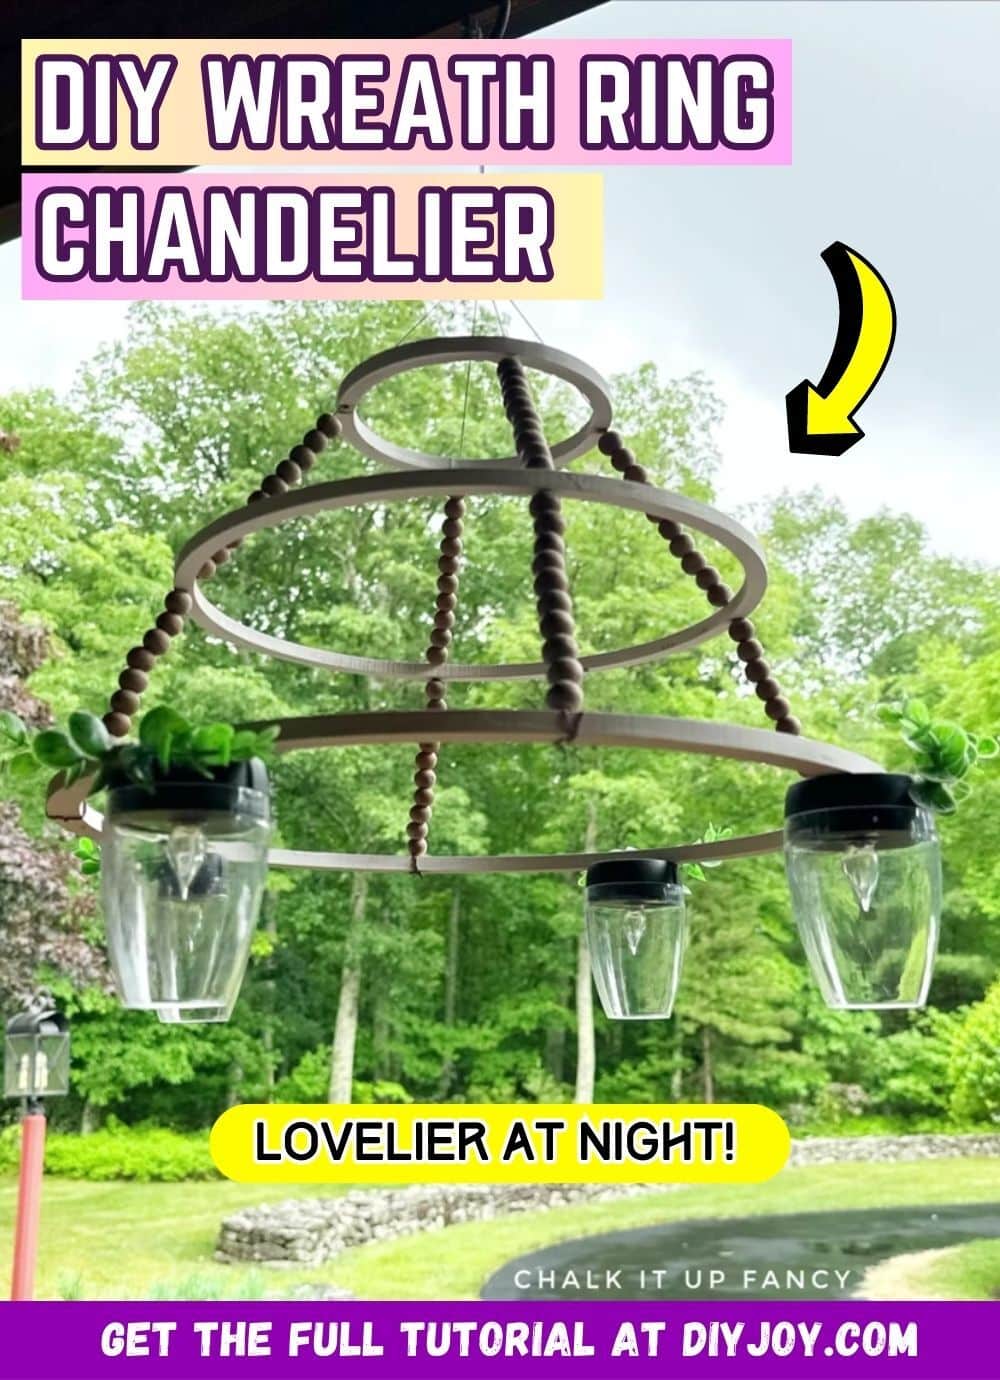 How To Make A Lovely DIY Wreath Ring Chandelier